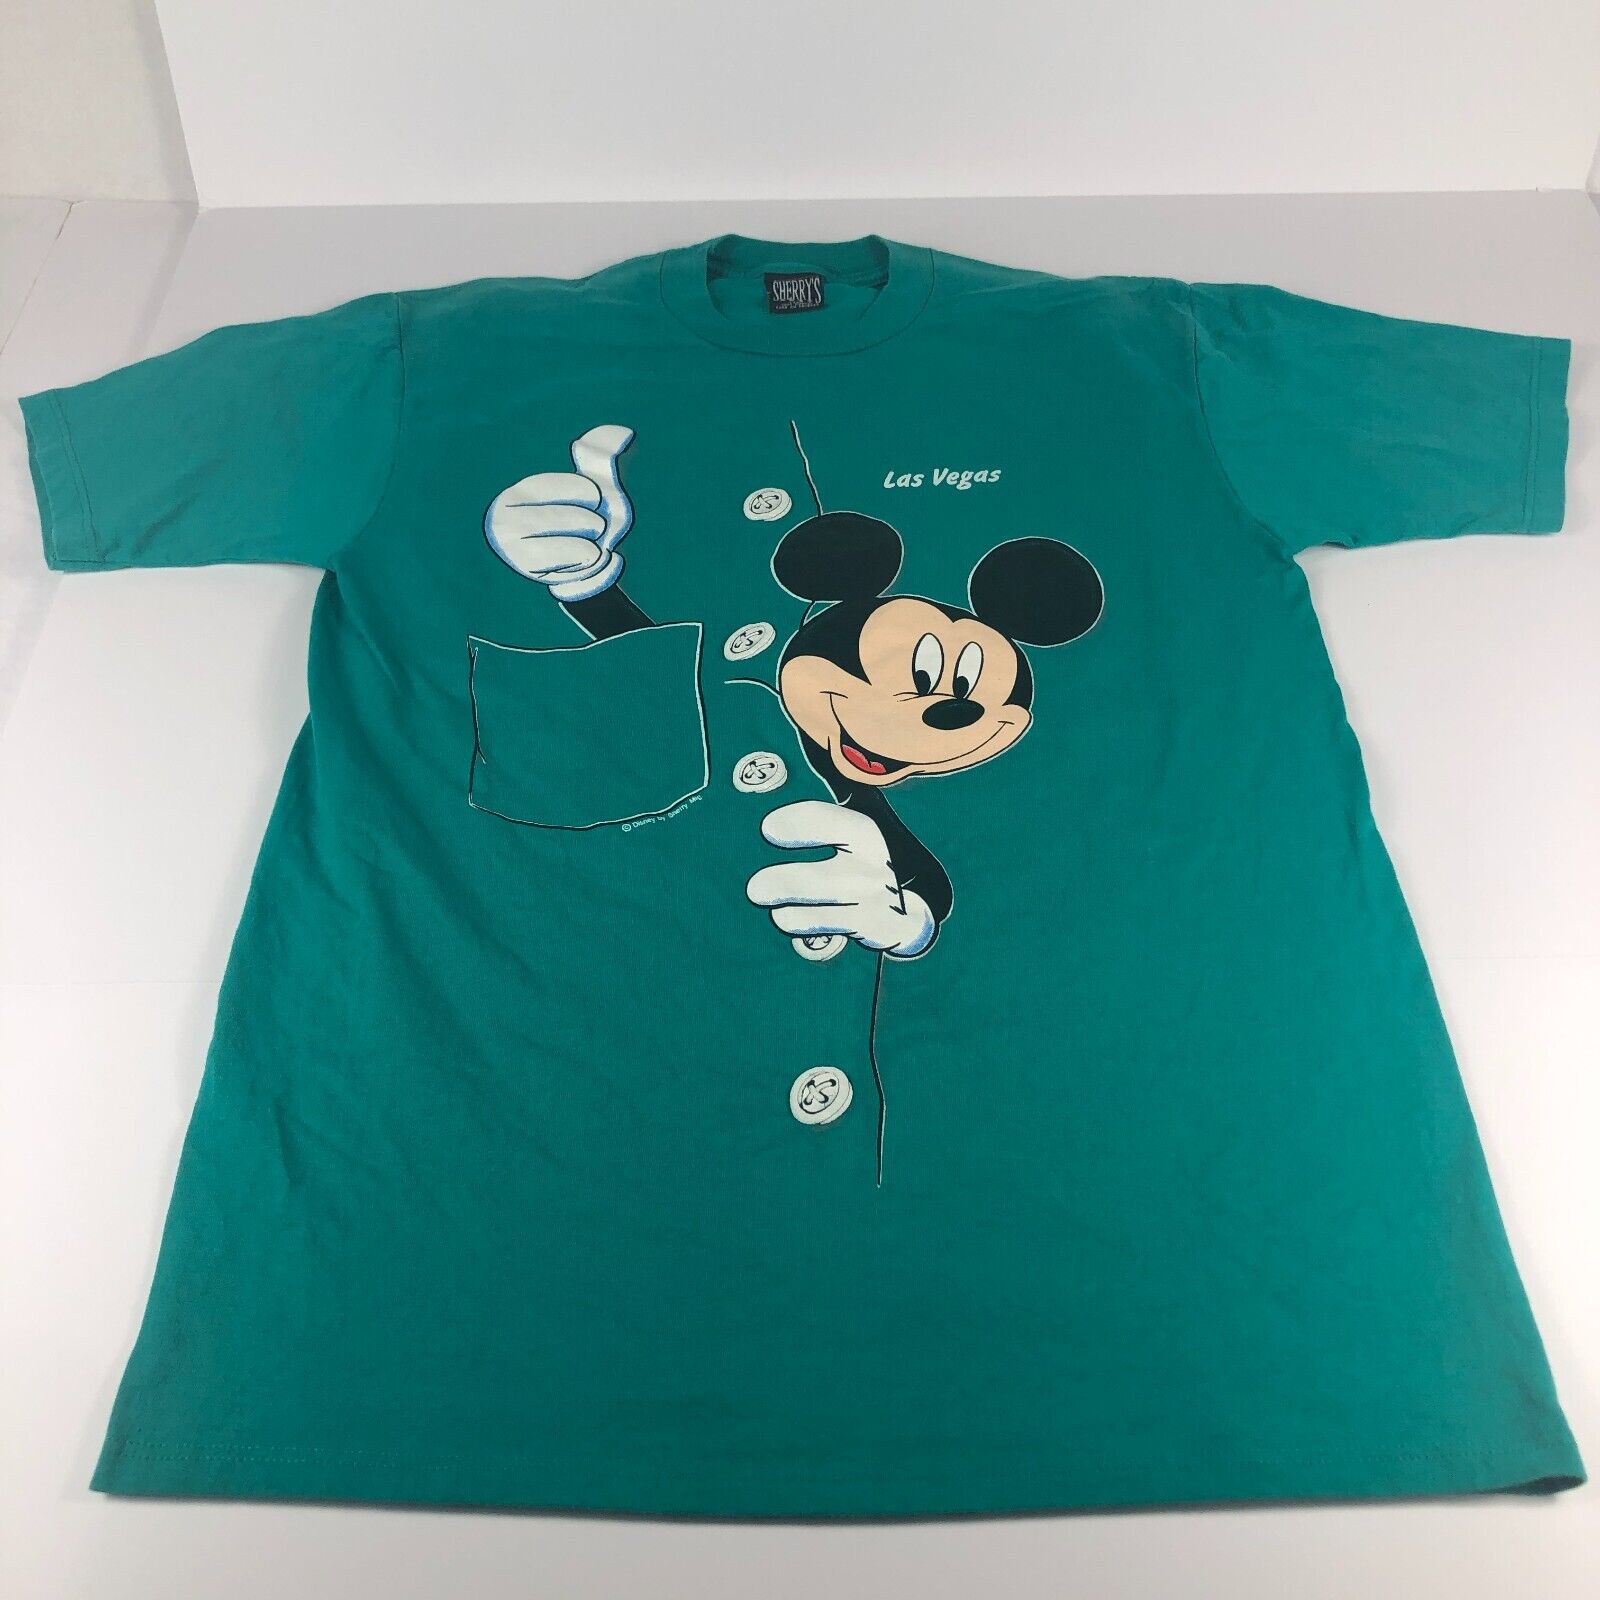 VTG 90s Sherry's Mickey Mouse Shirt Adult Large Green Mega Graphic Short Sleeve